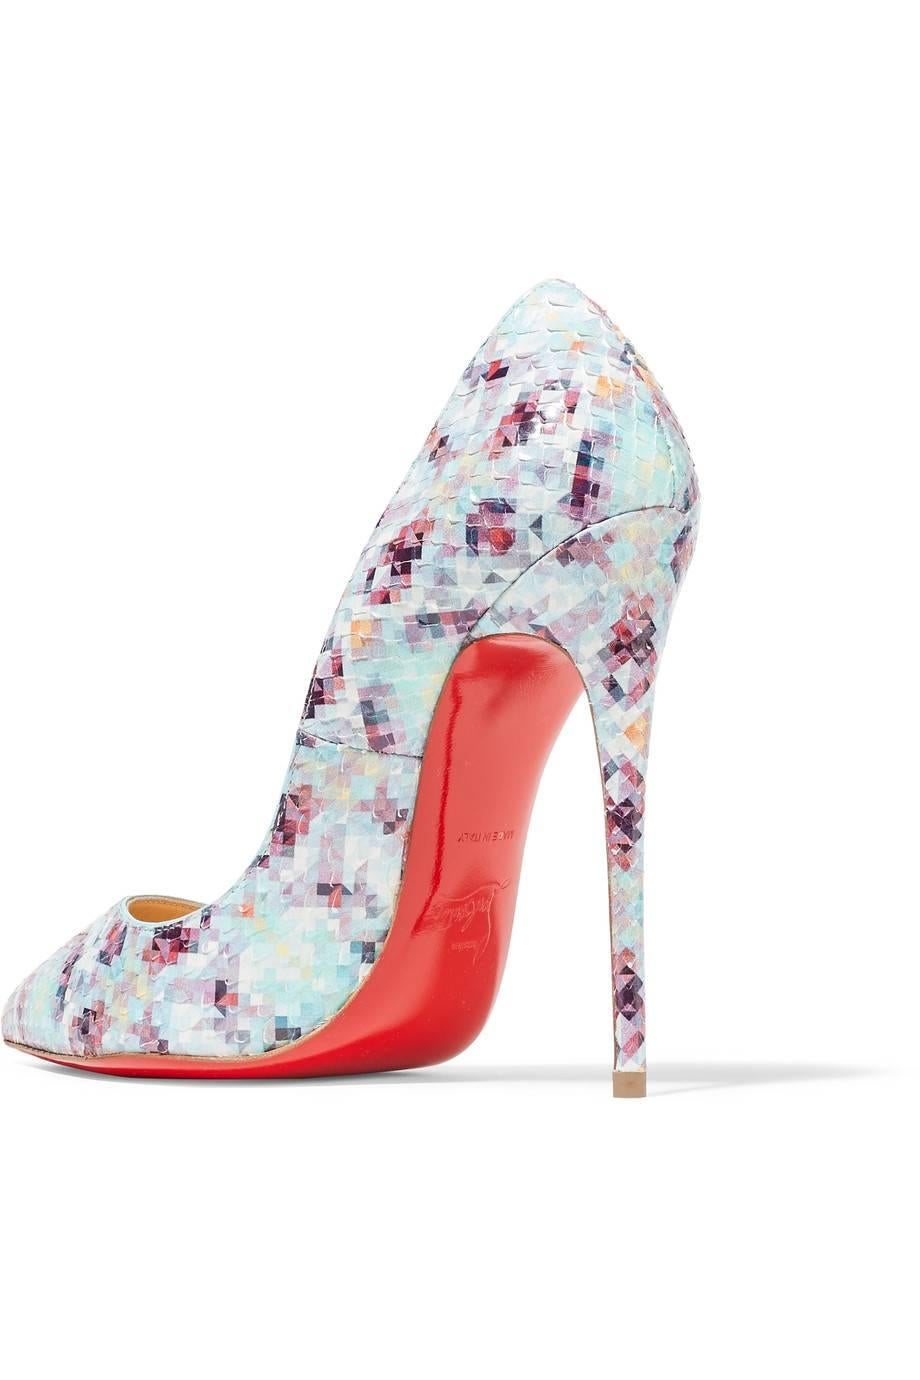 Christian Louboutin New Sold Out Mosaic Snakeskin So Kate Heels Pumps in Box In New Condition In Chicago, IL